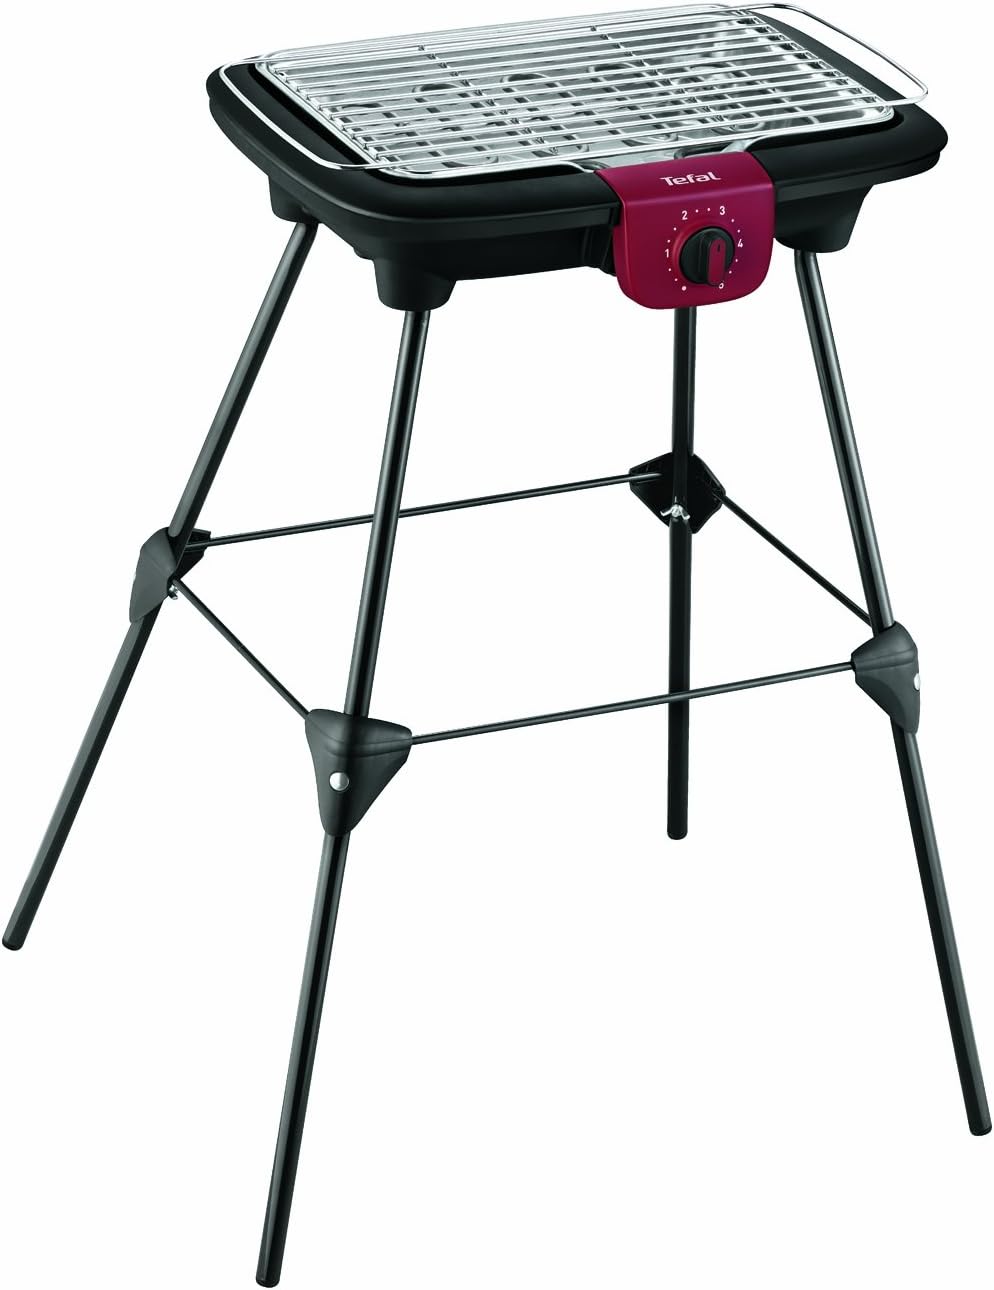 Tefal Easy Grill Stand Grill with Removable BG902812 Aluminium Heat Reflector 2,200 W Black/burgundrot